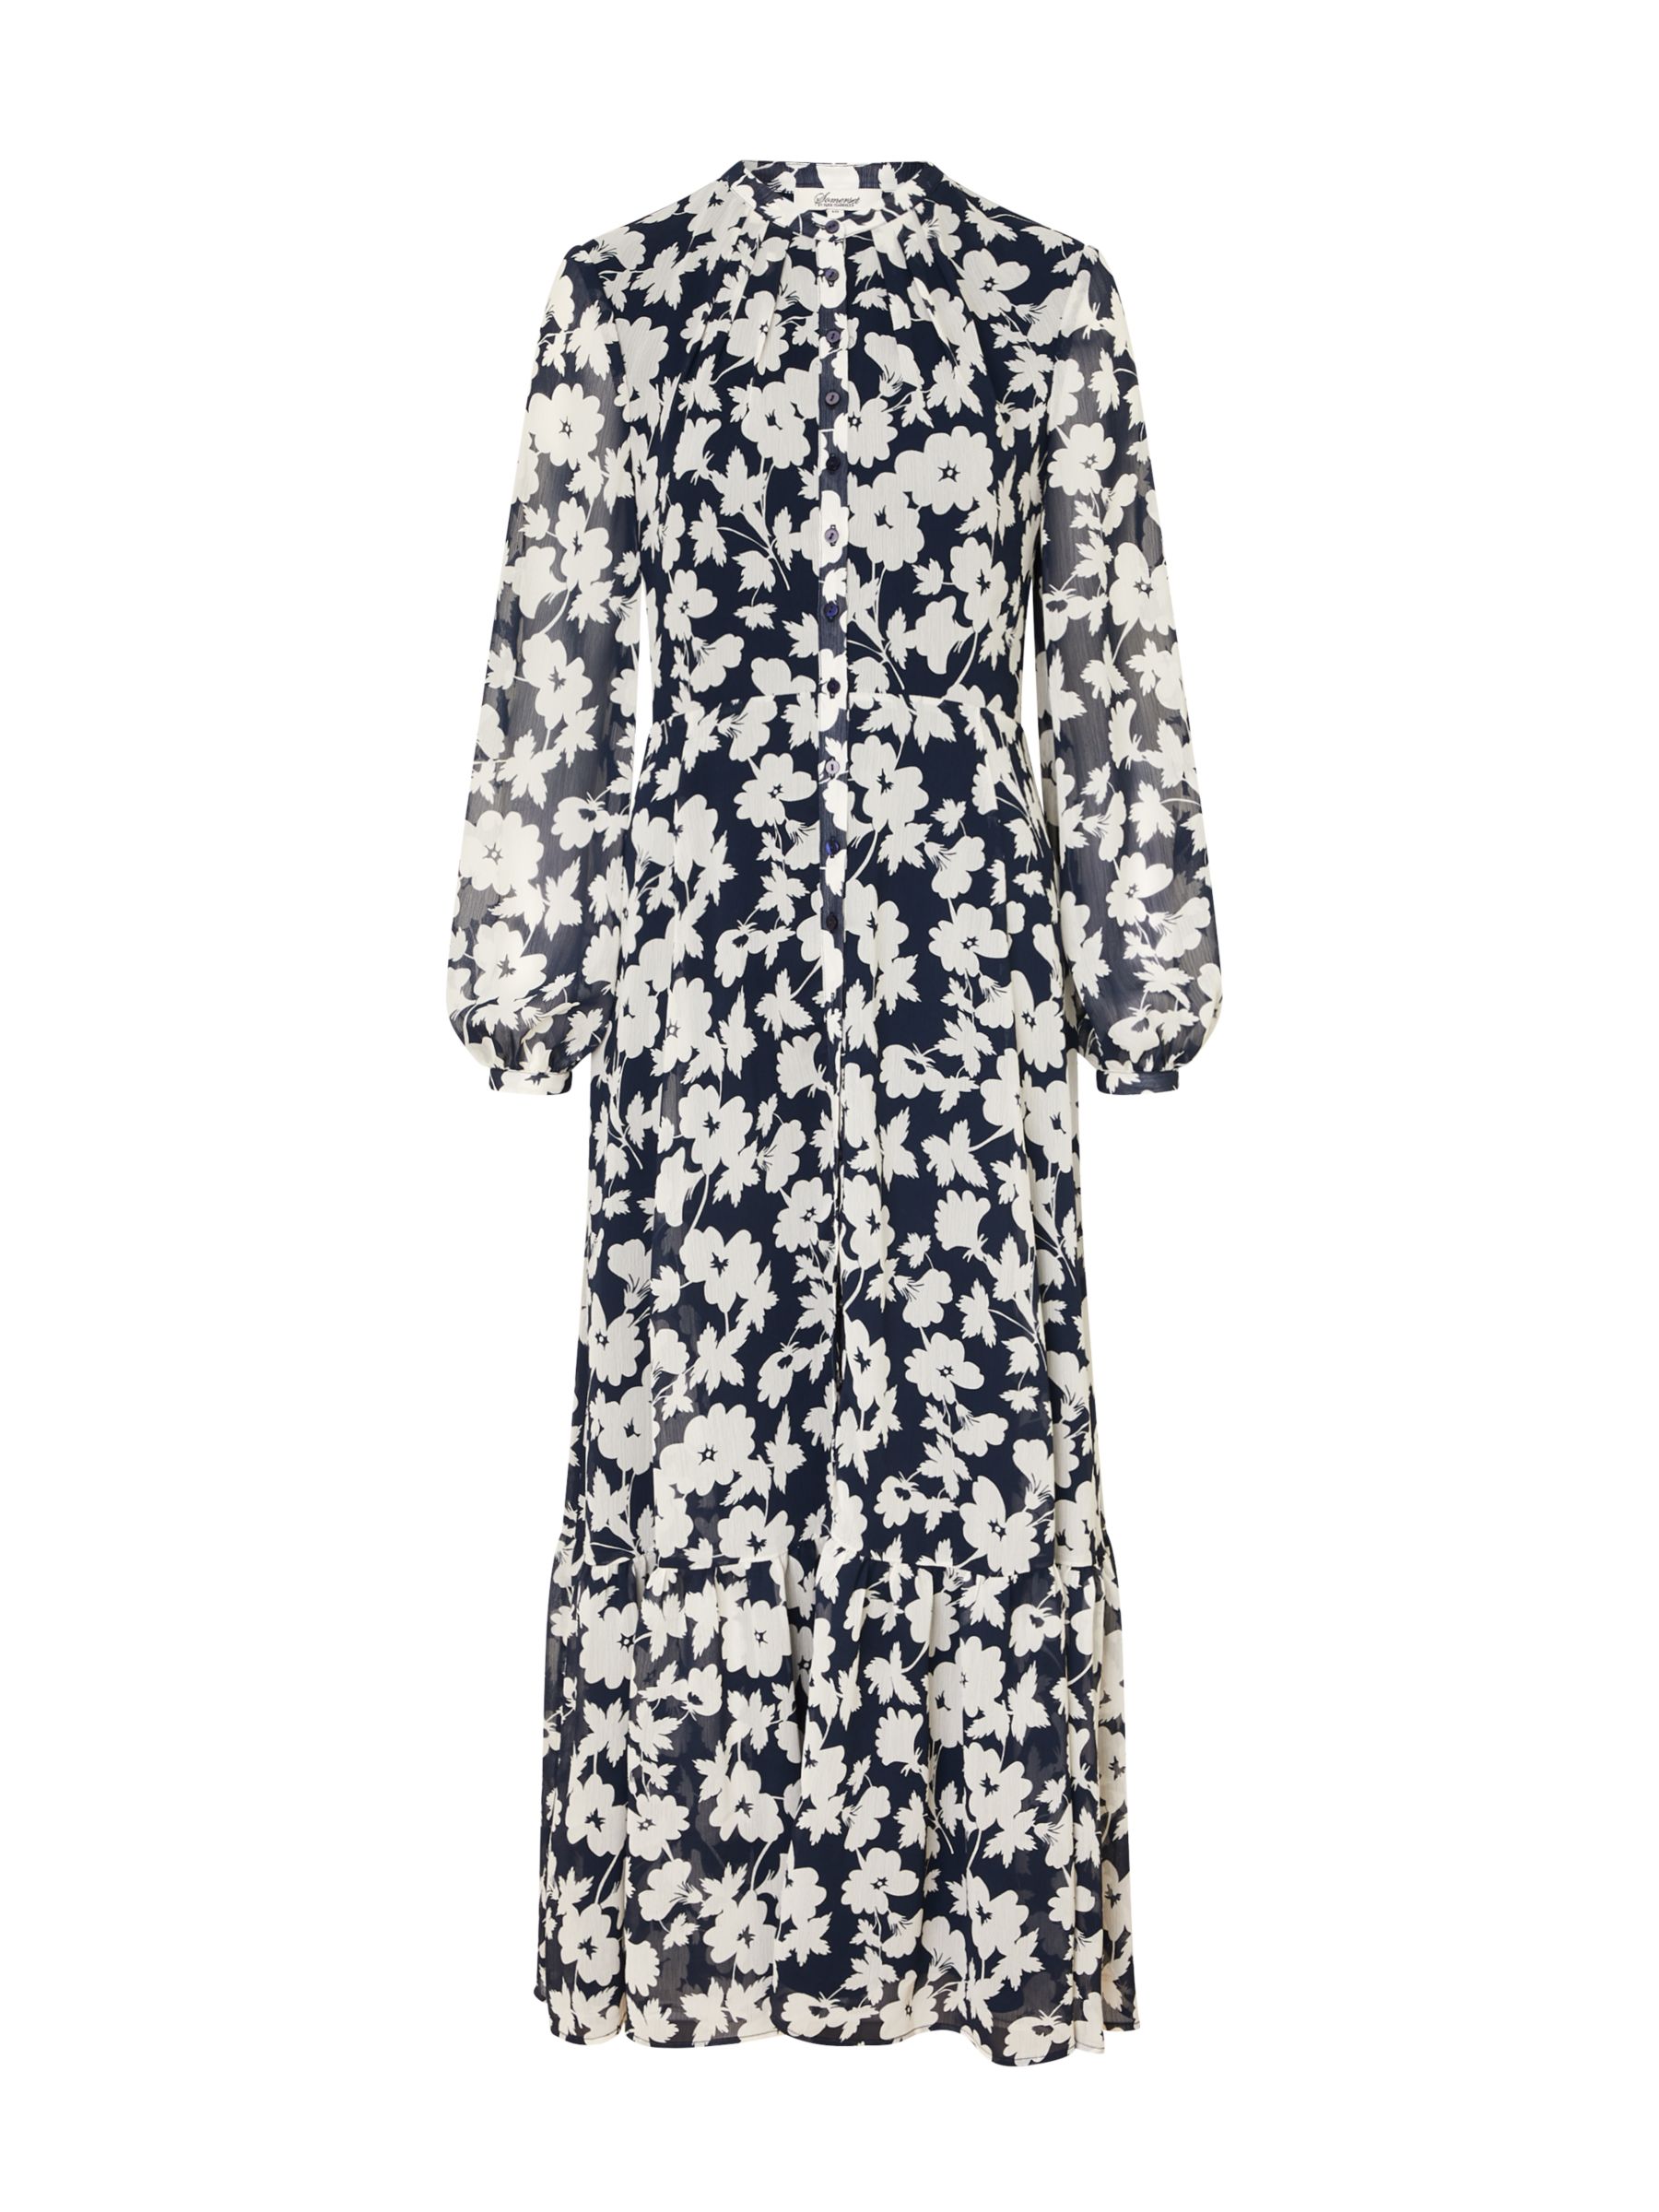 Somerset by Alice Temperley Floral Maxi Dress, Navy